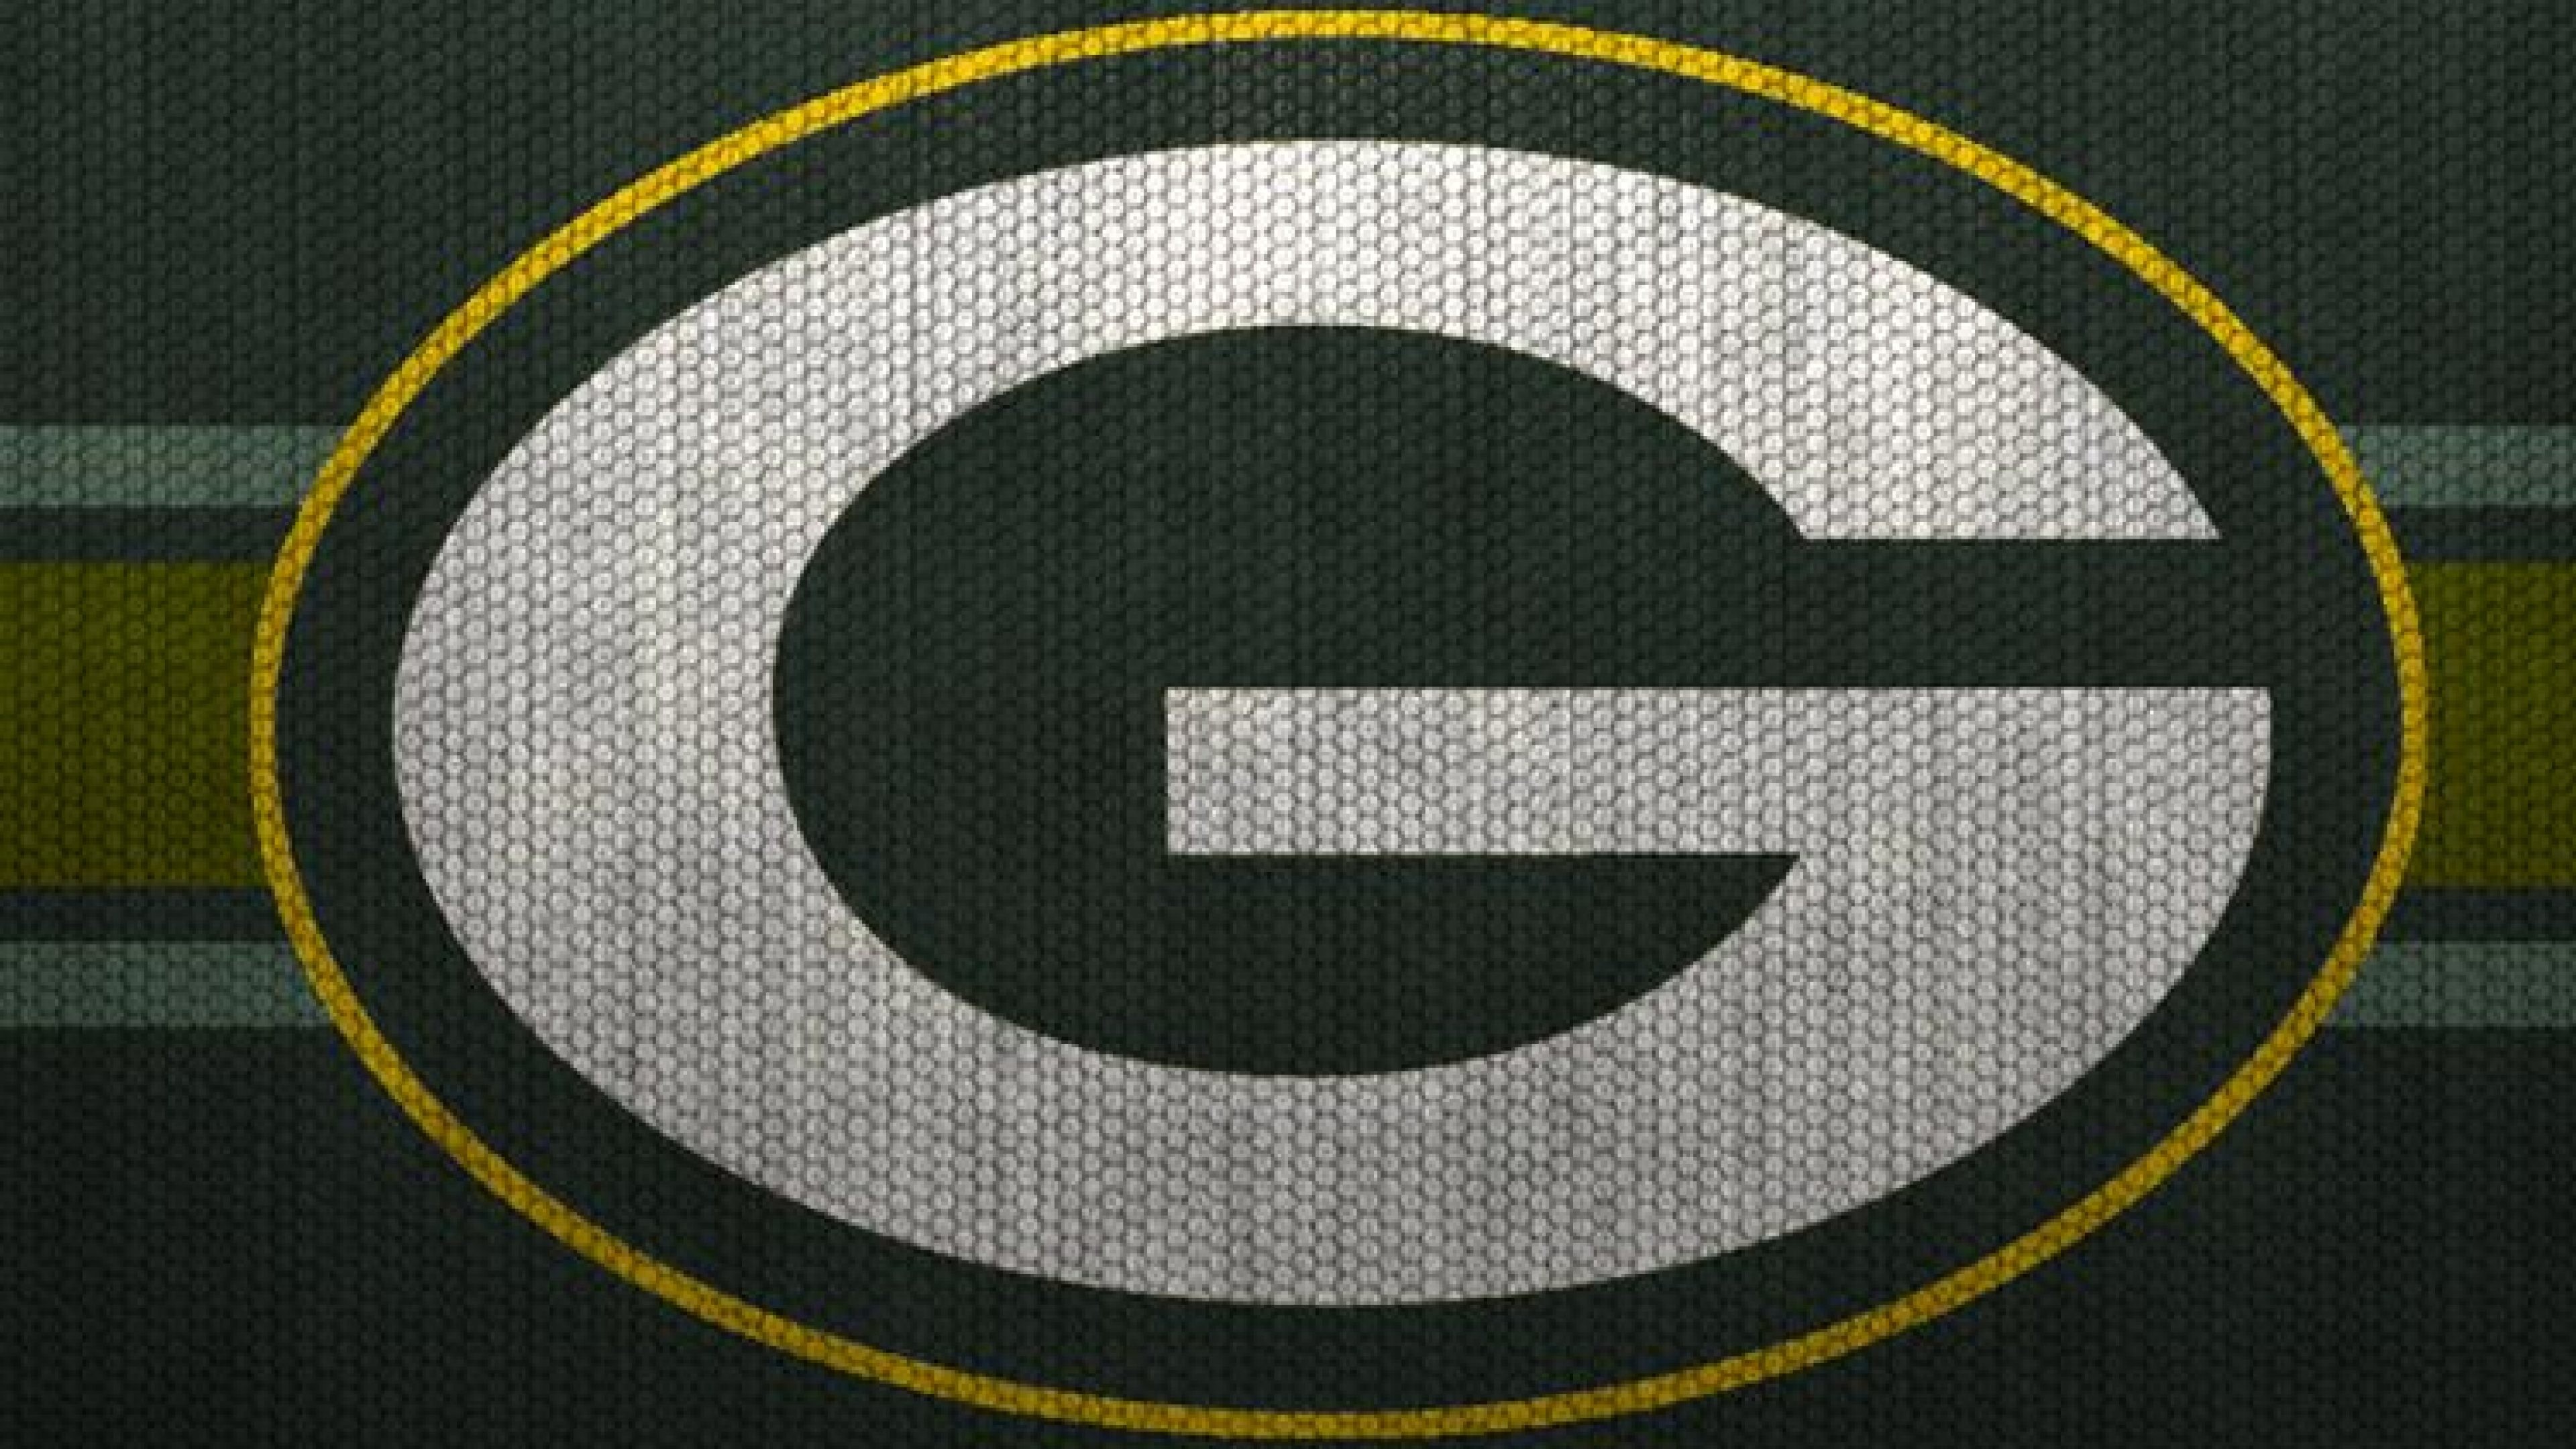 3840x2160 green bay packers iphone wallpaper